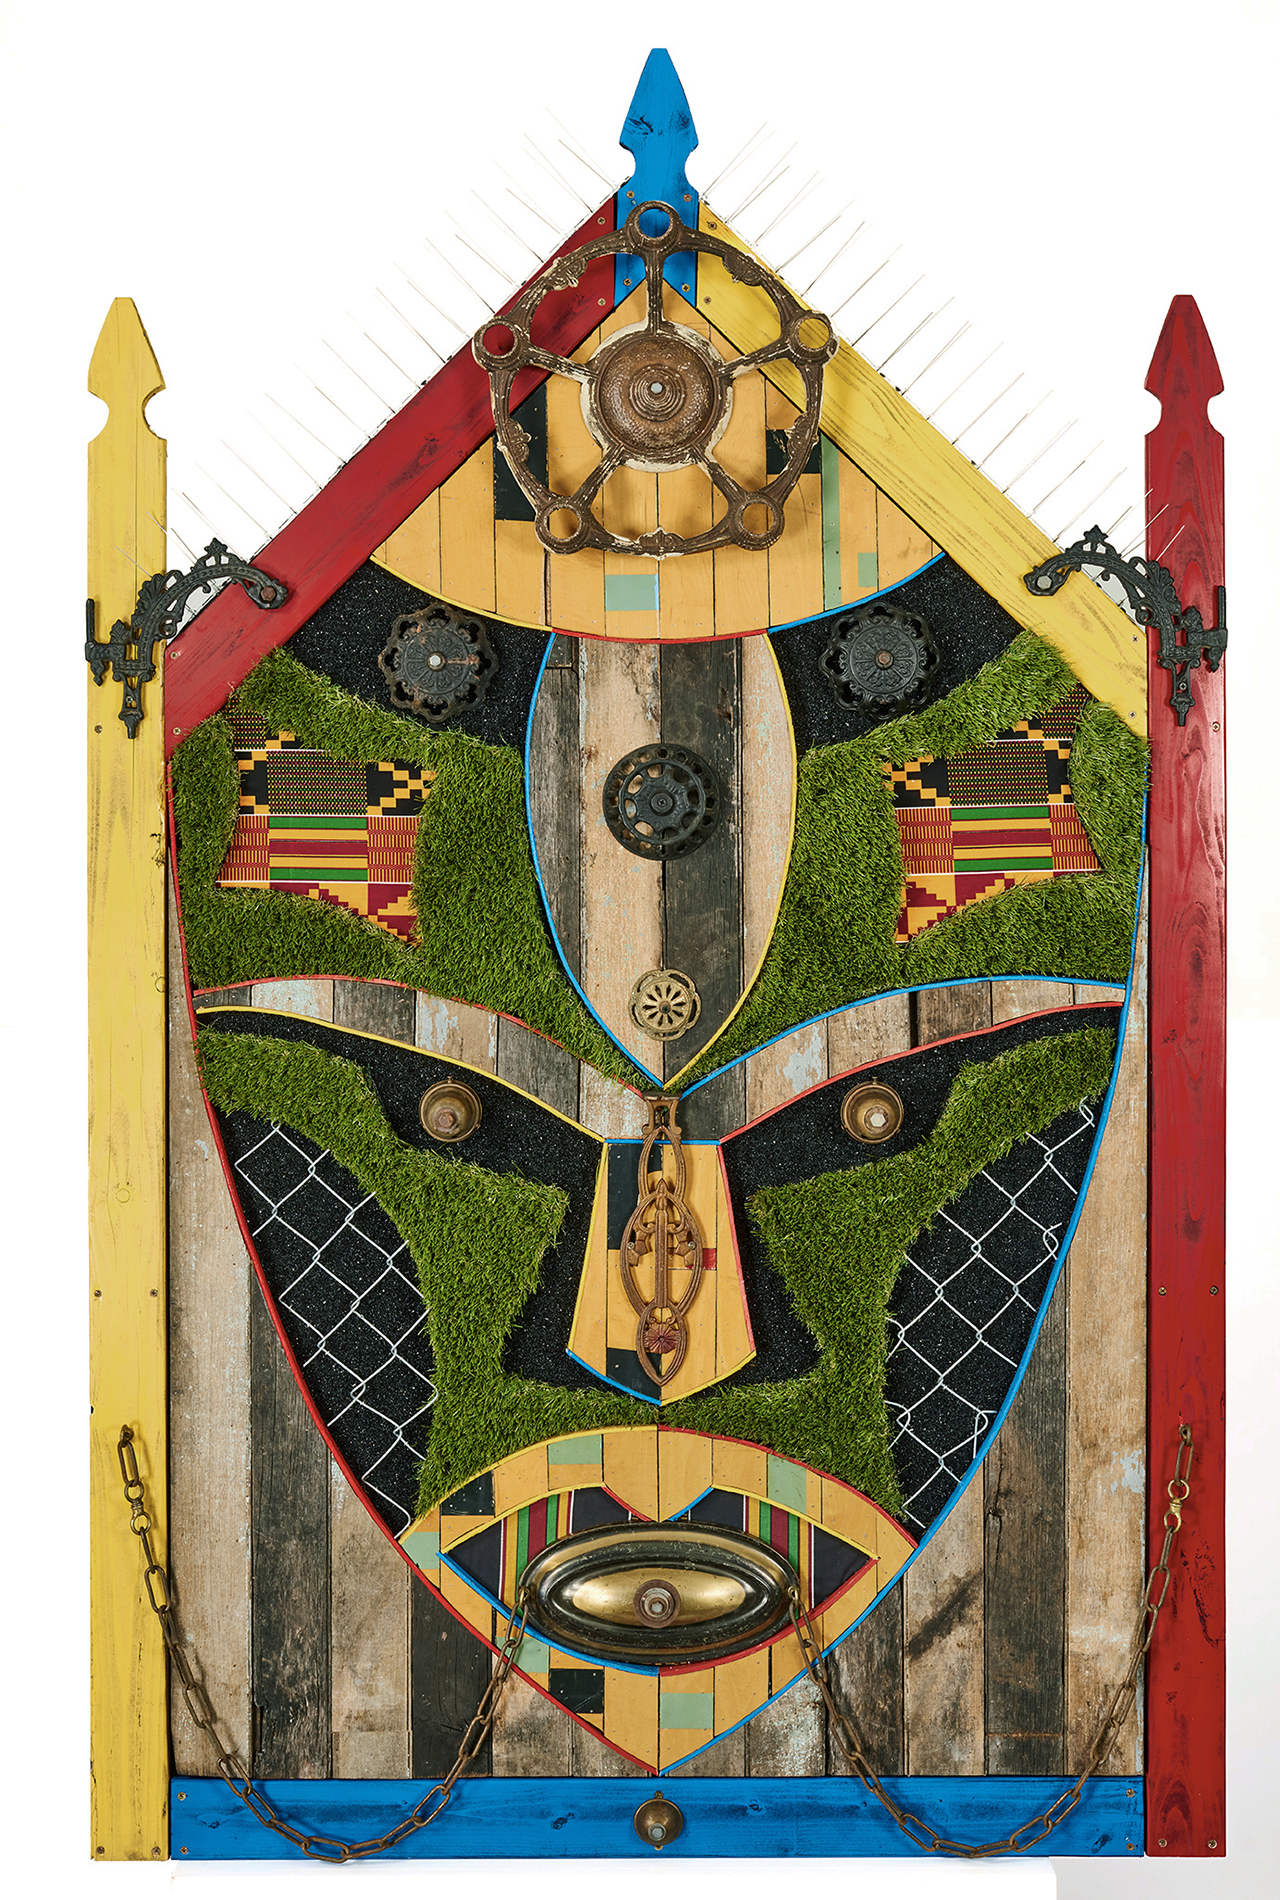 Sentinel, The Defender; by Aaron Coleman. A mixed media assemblage evoking Ghanaian masks, made from fencing, fake turf, and salvaged wood from a neighbor's home lost to gentrification.